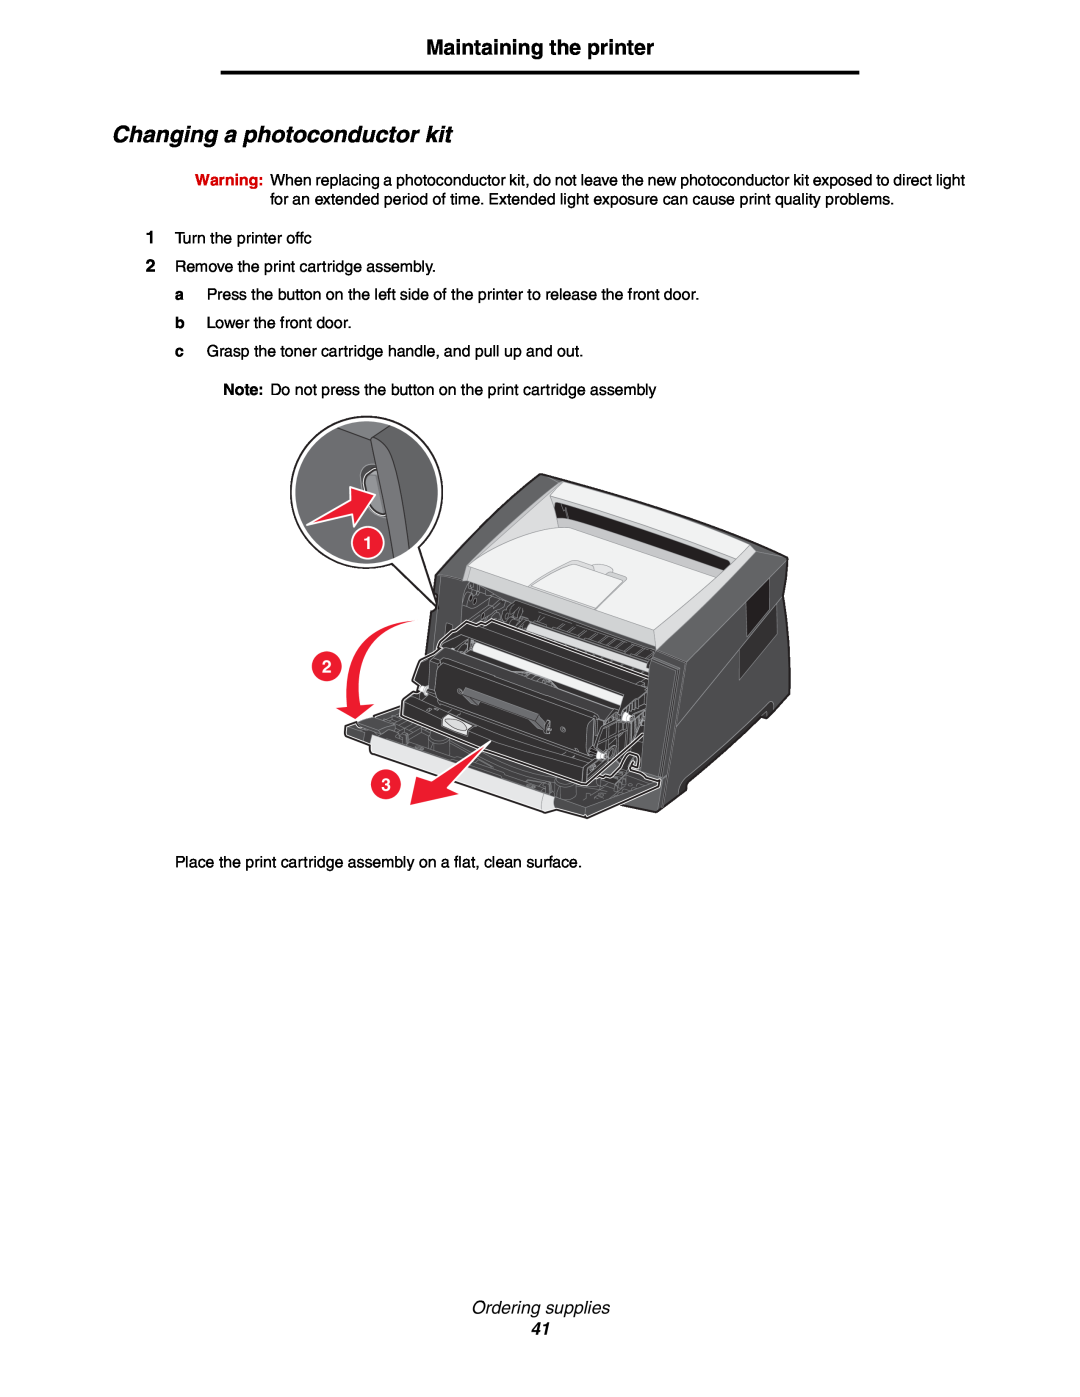 Lexmark 450dn manual Changing a photoconductor kit, Maintaining the printer, Ordering supplies 